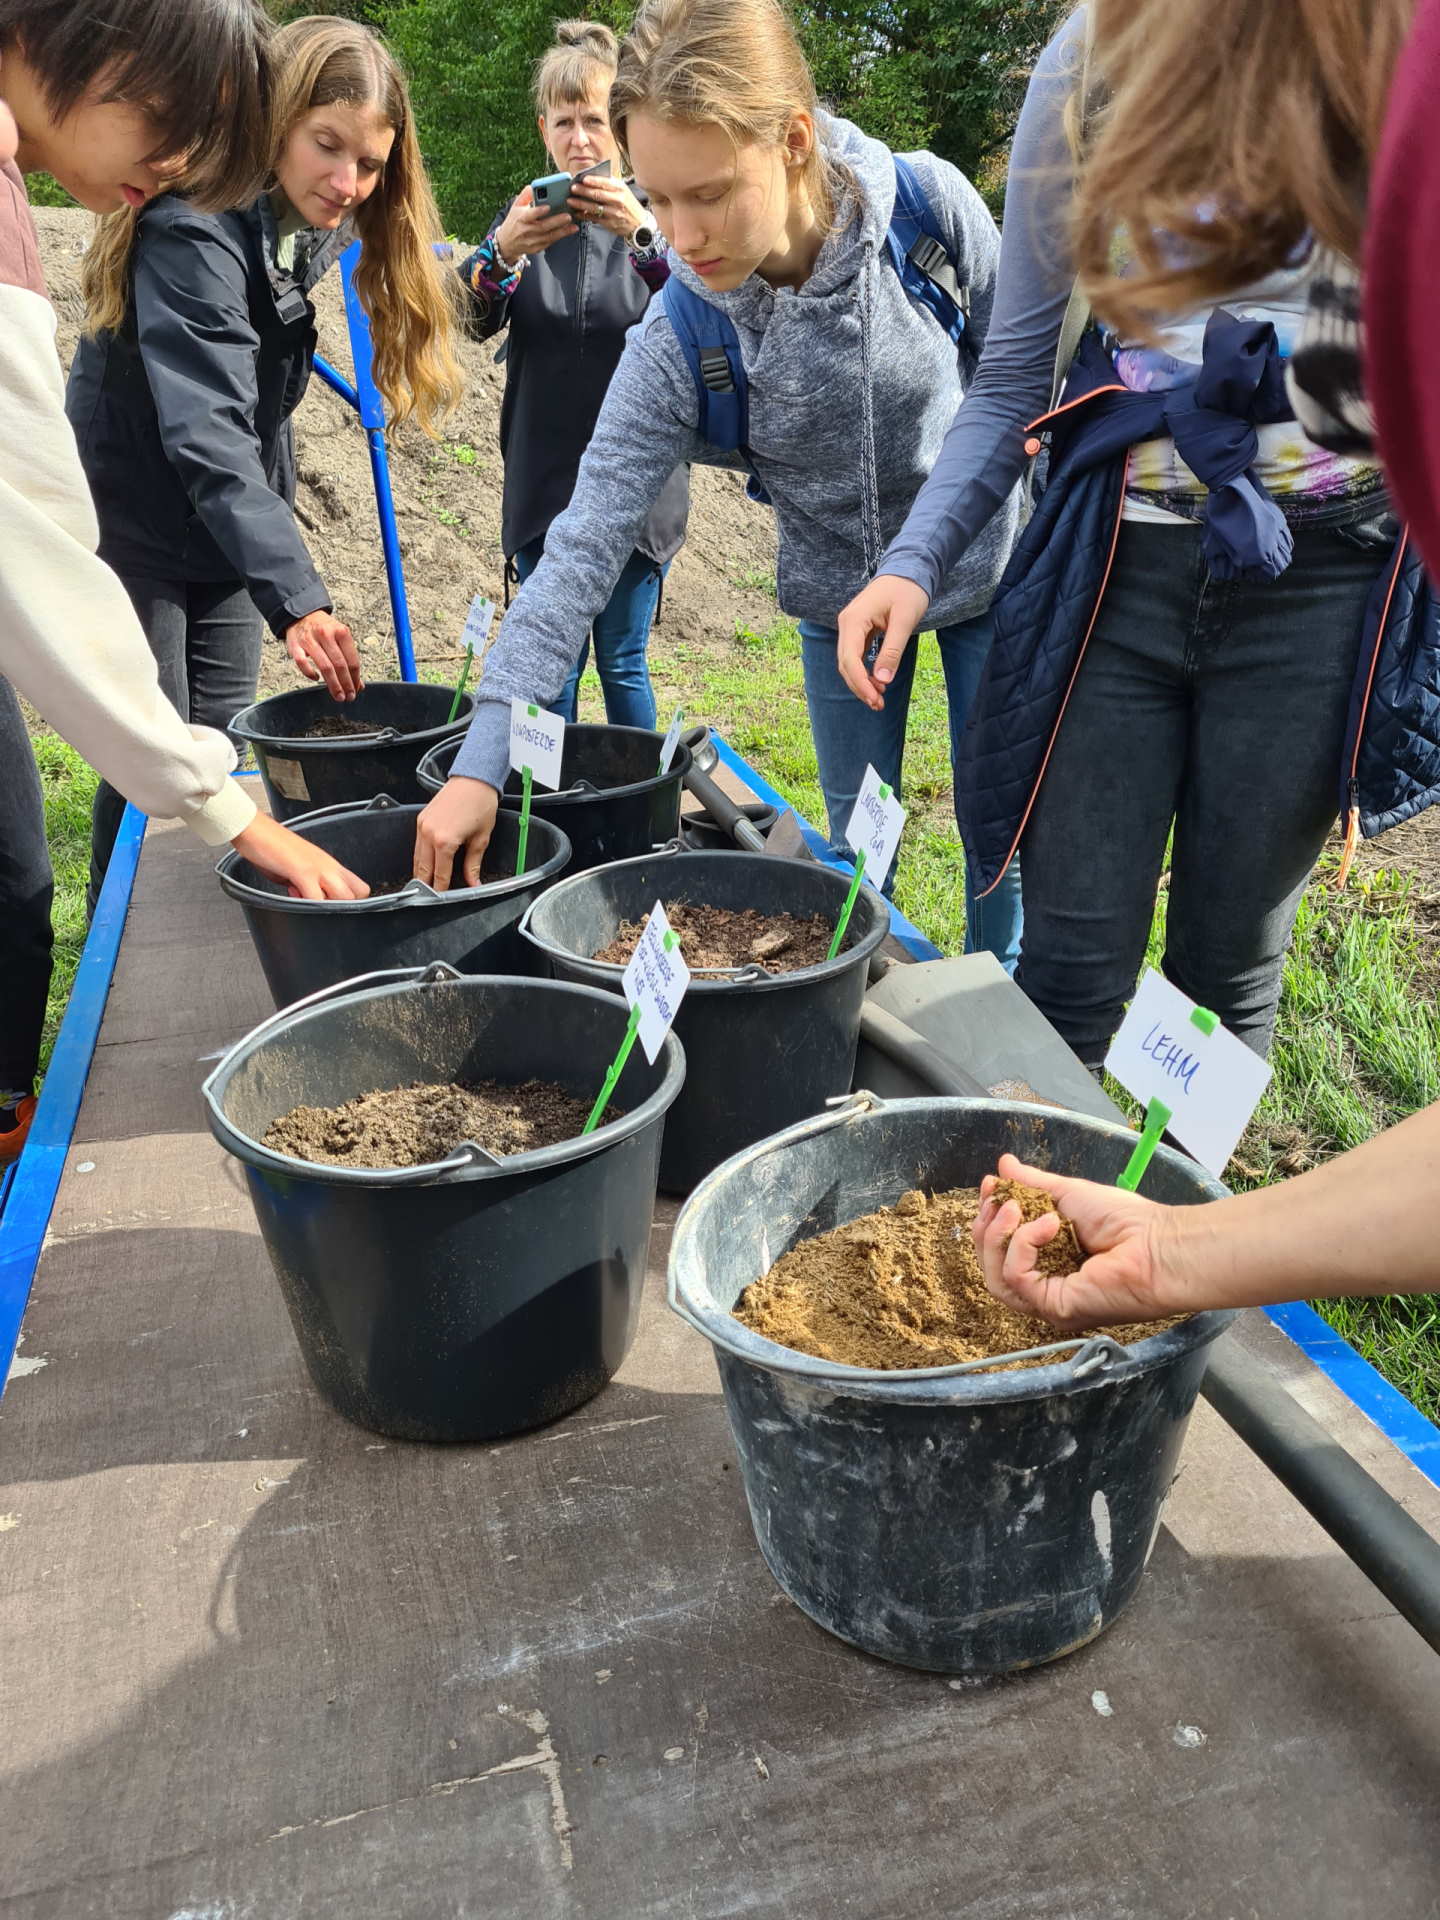 Hands-on: experiencing soil